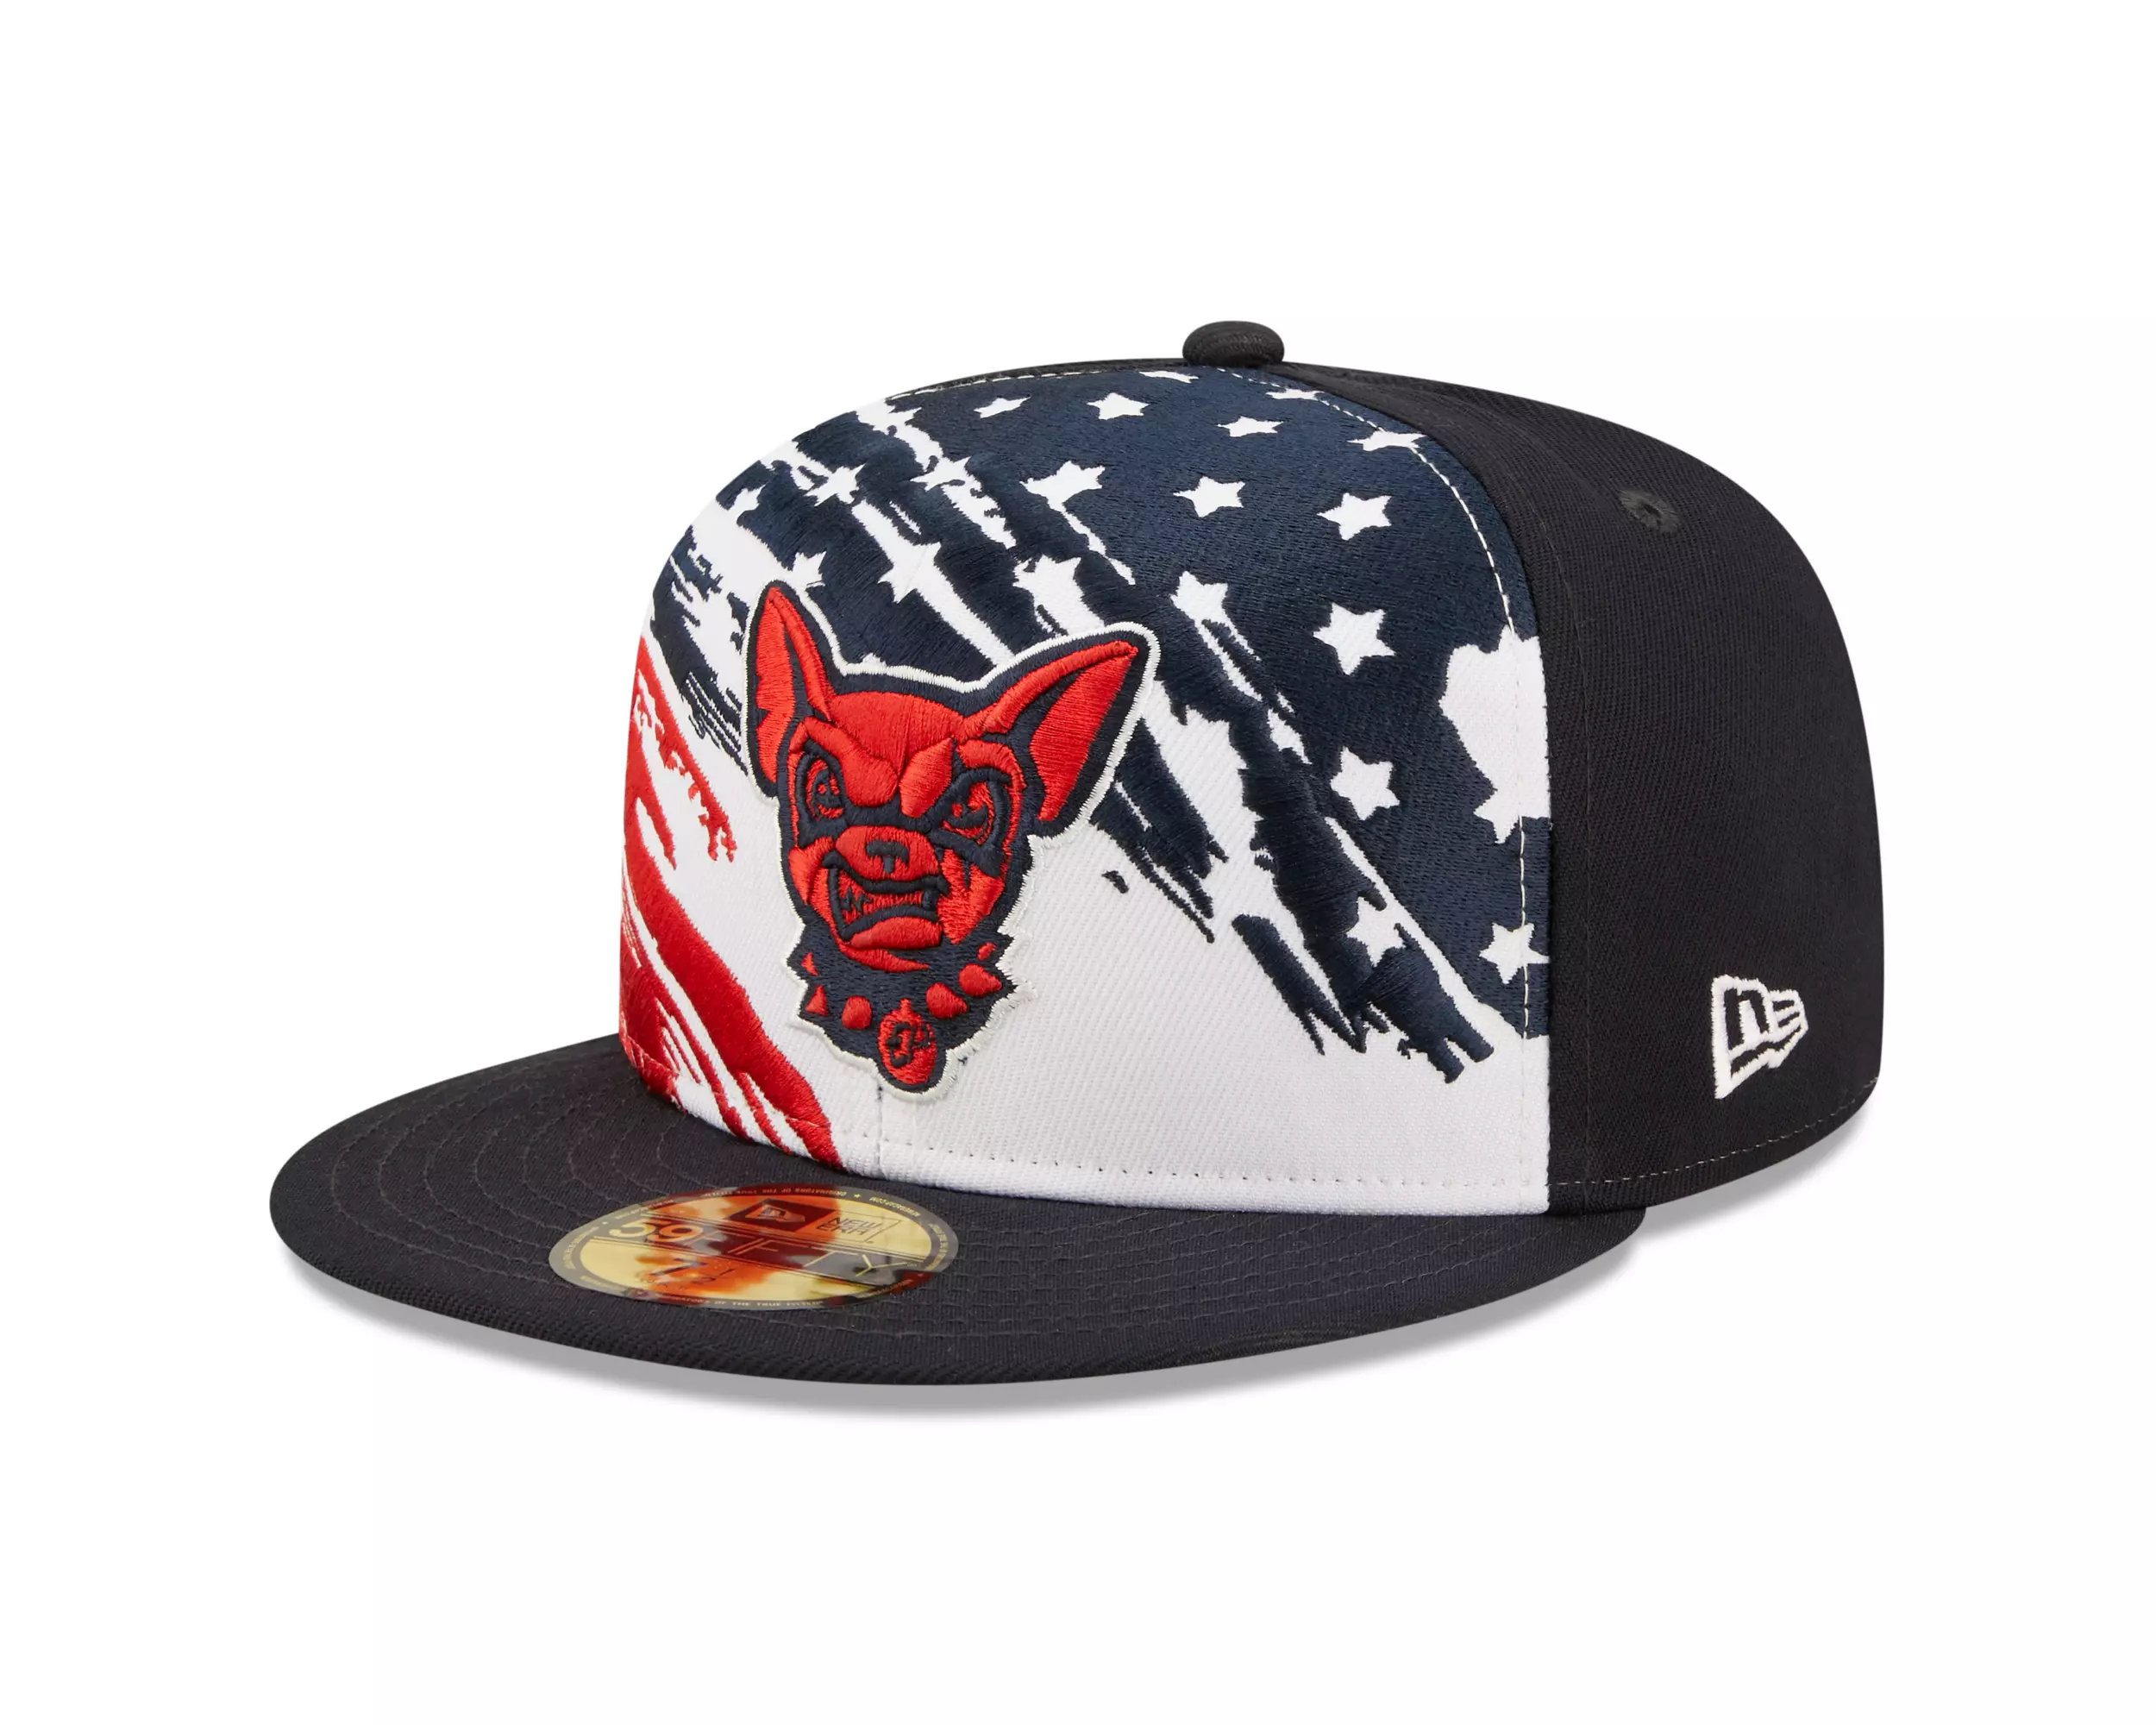 El Paso Chihuahuas Release New Stars and Stripes Cap and Jersey